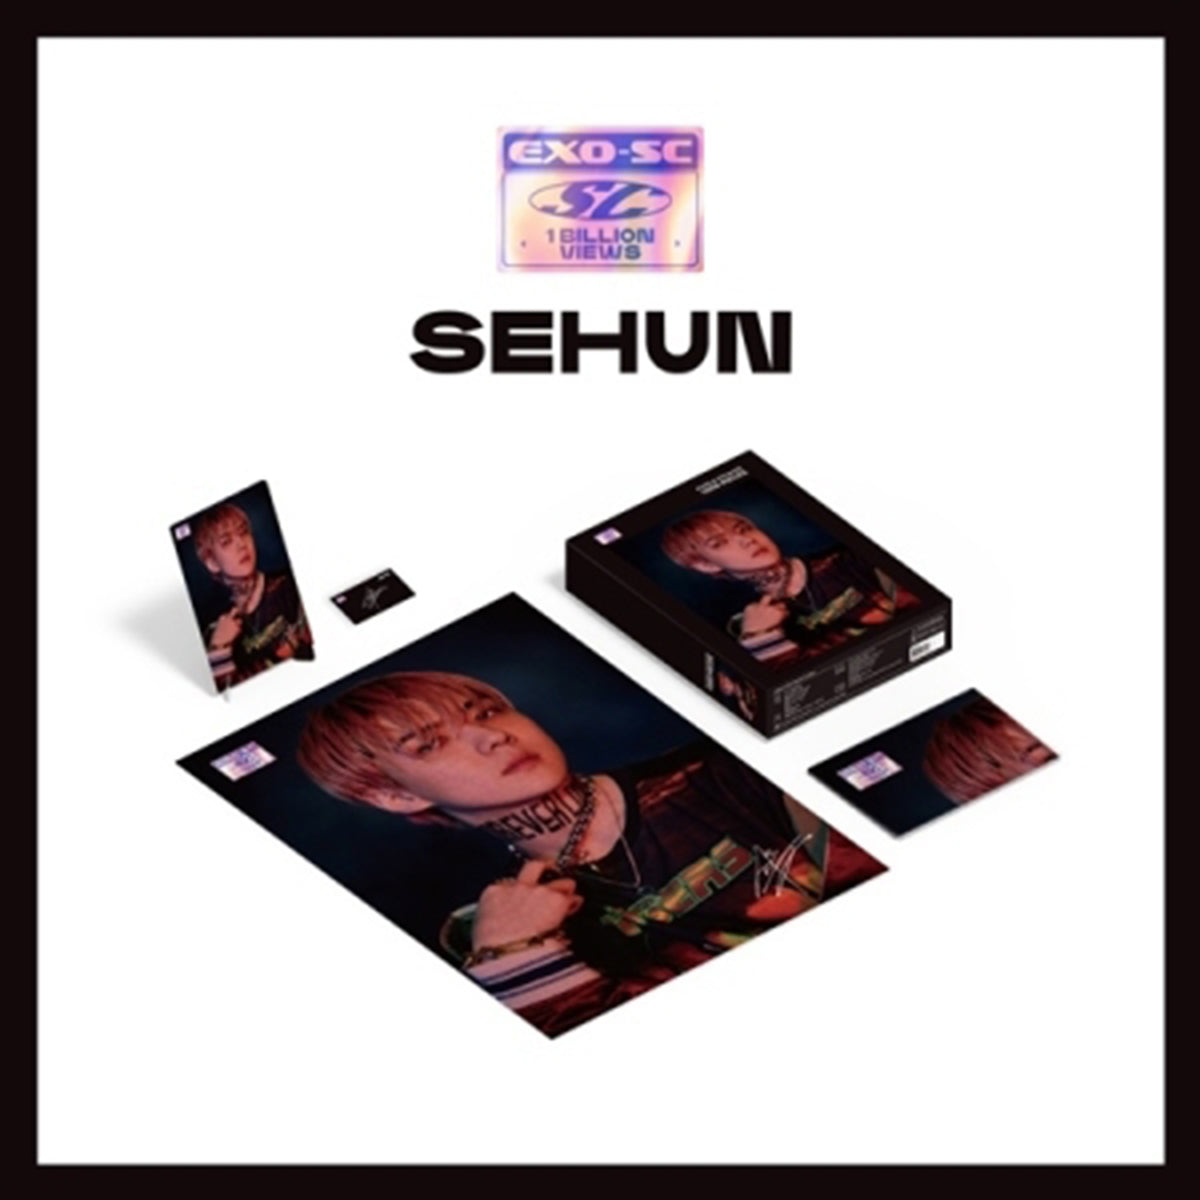 Sehun & Chanyeol (EXO-SC)-Puzzle Package (Sehun VER.) [Limited Edition]